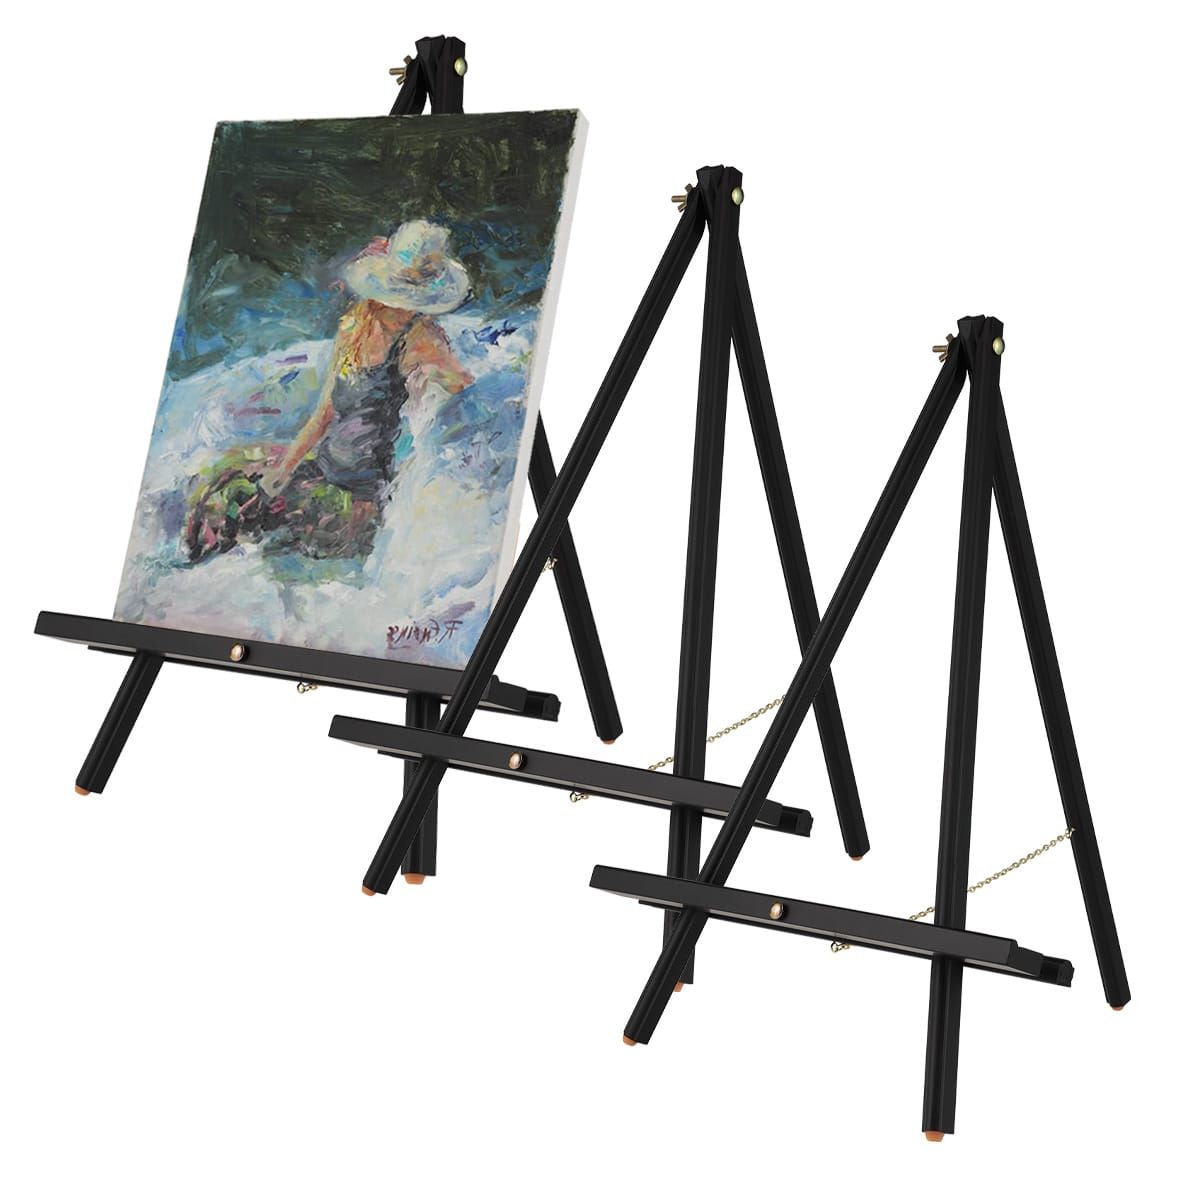 2 x 2 Stretched Canvas with 5 Mini Black Wood Display Easel Kit